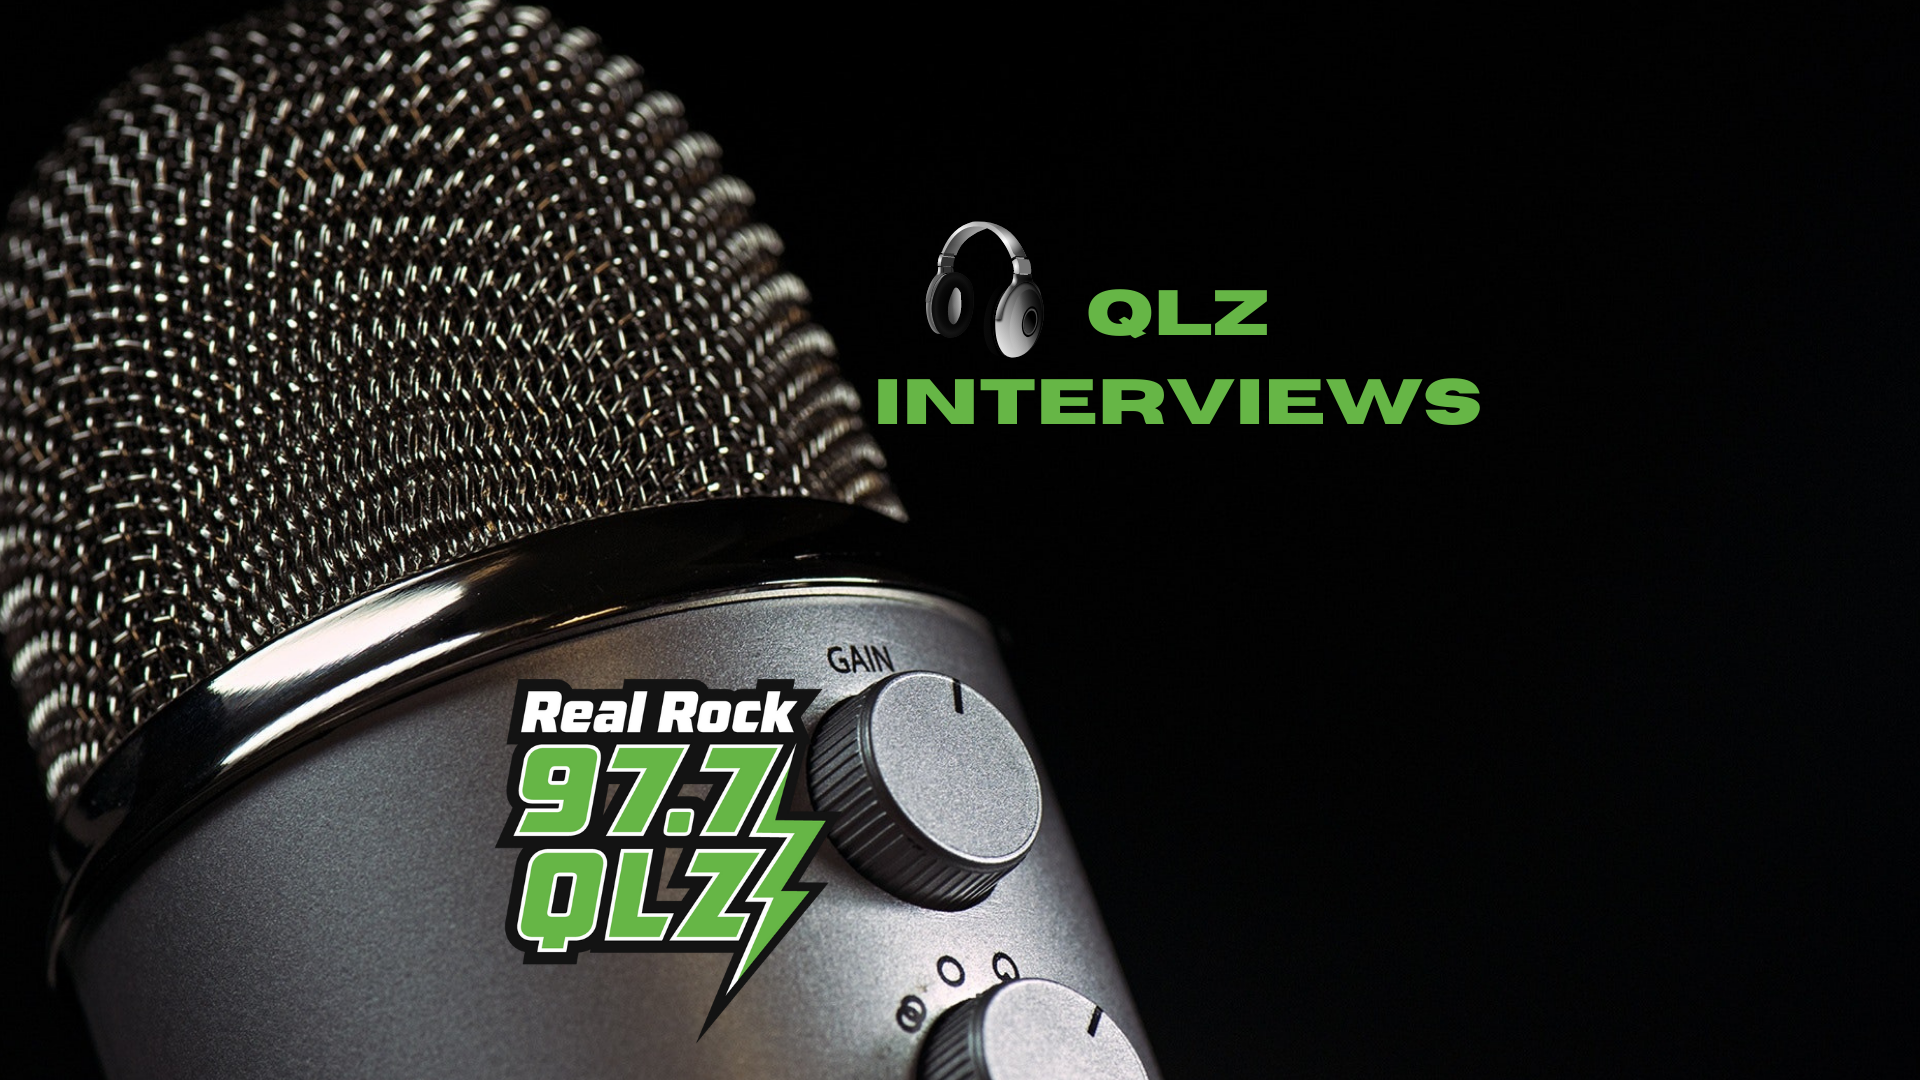 QLZ Community Interviews: Deane Of The Boys & Girls Clubs Of Central, IL IL